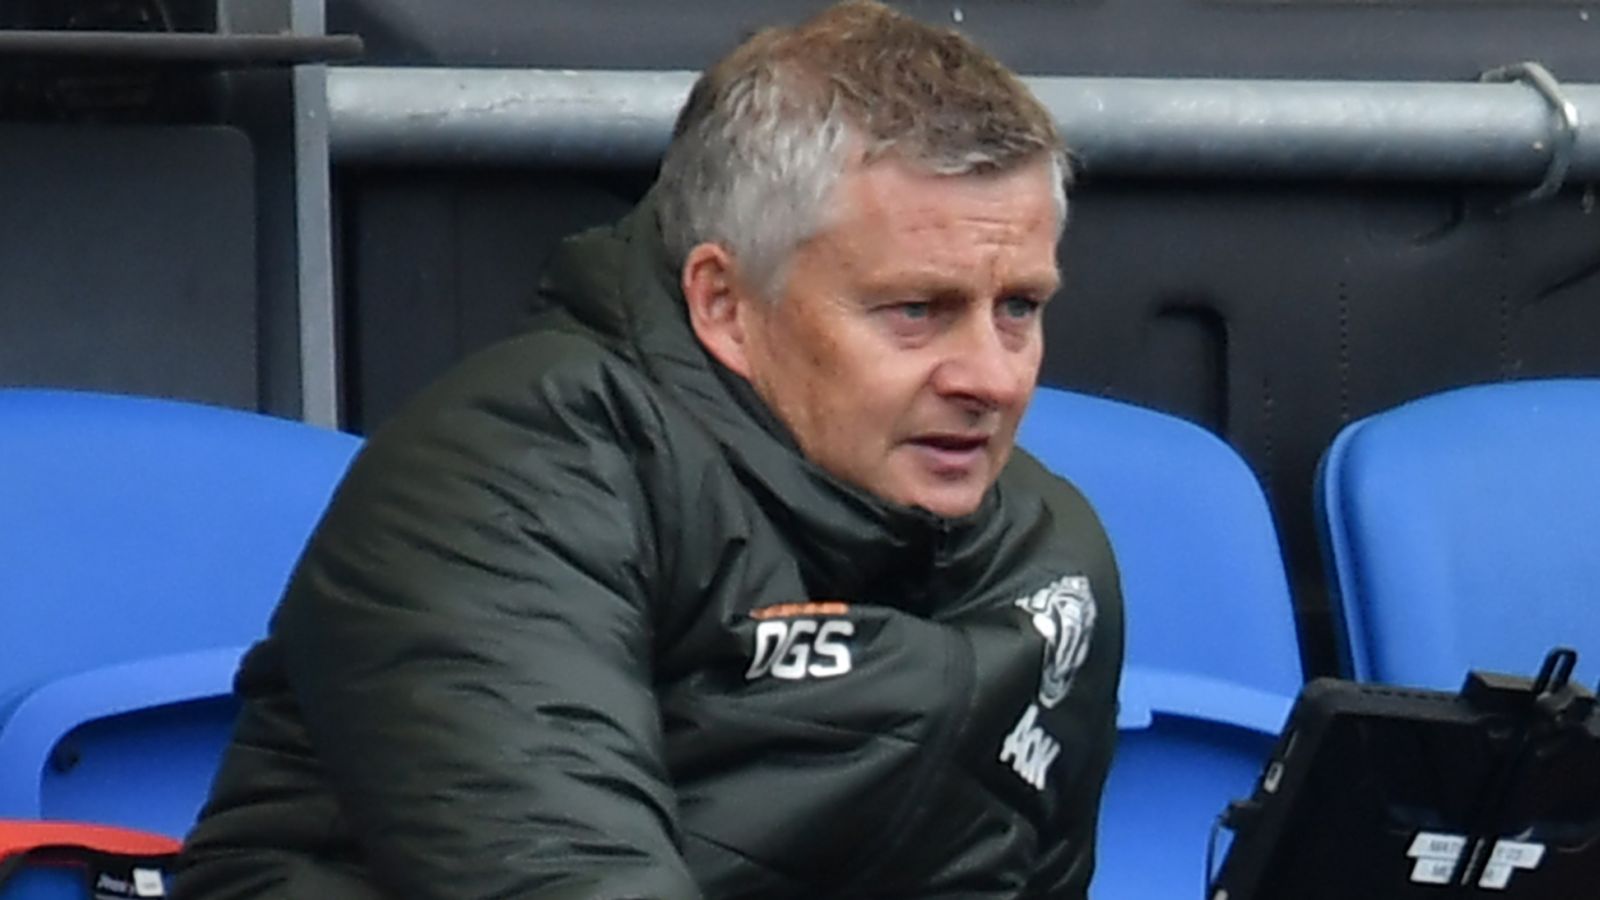 ole-gunnar-solskjaer-concedes-manchester-united-got-away-with-one-at-brighton